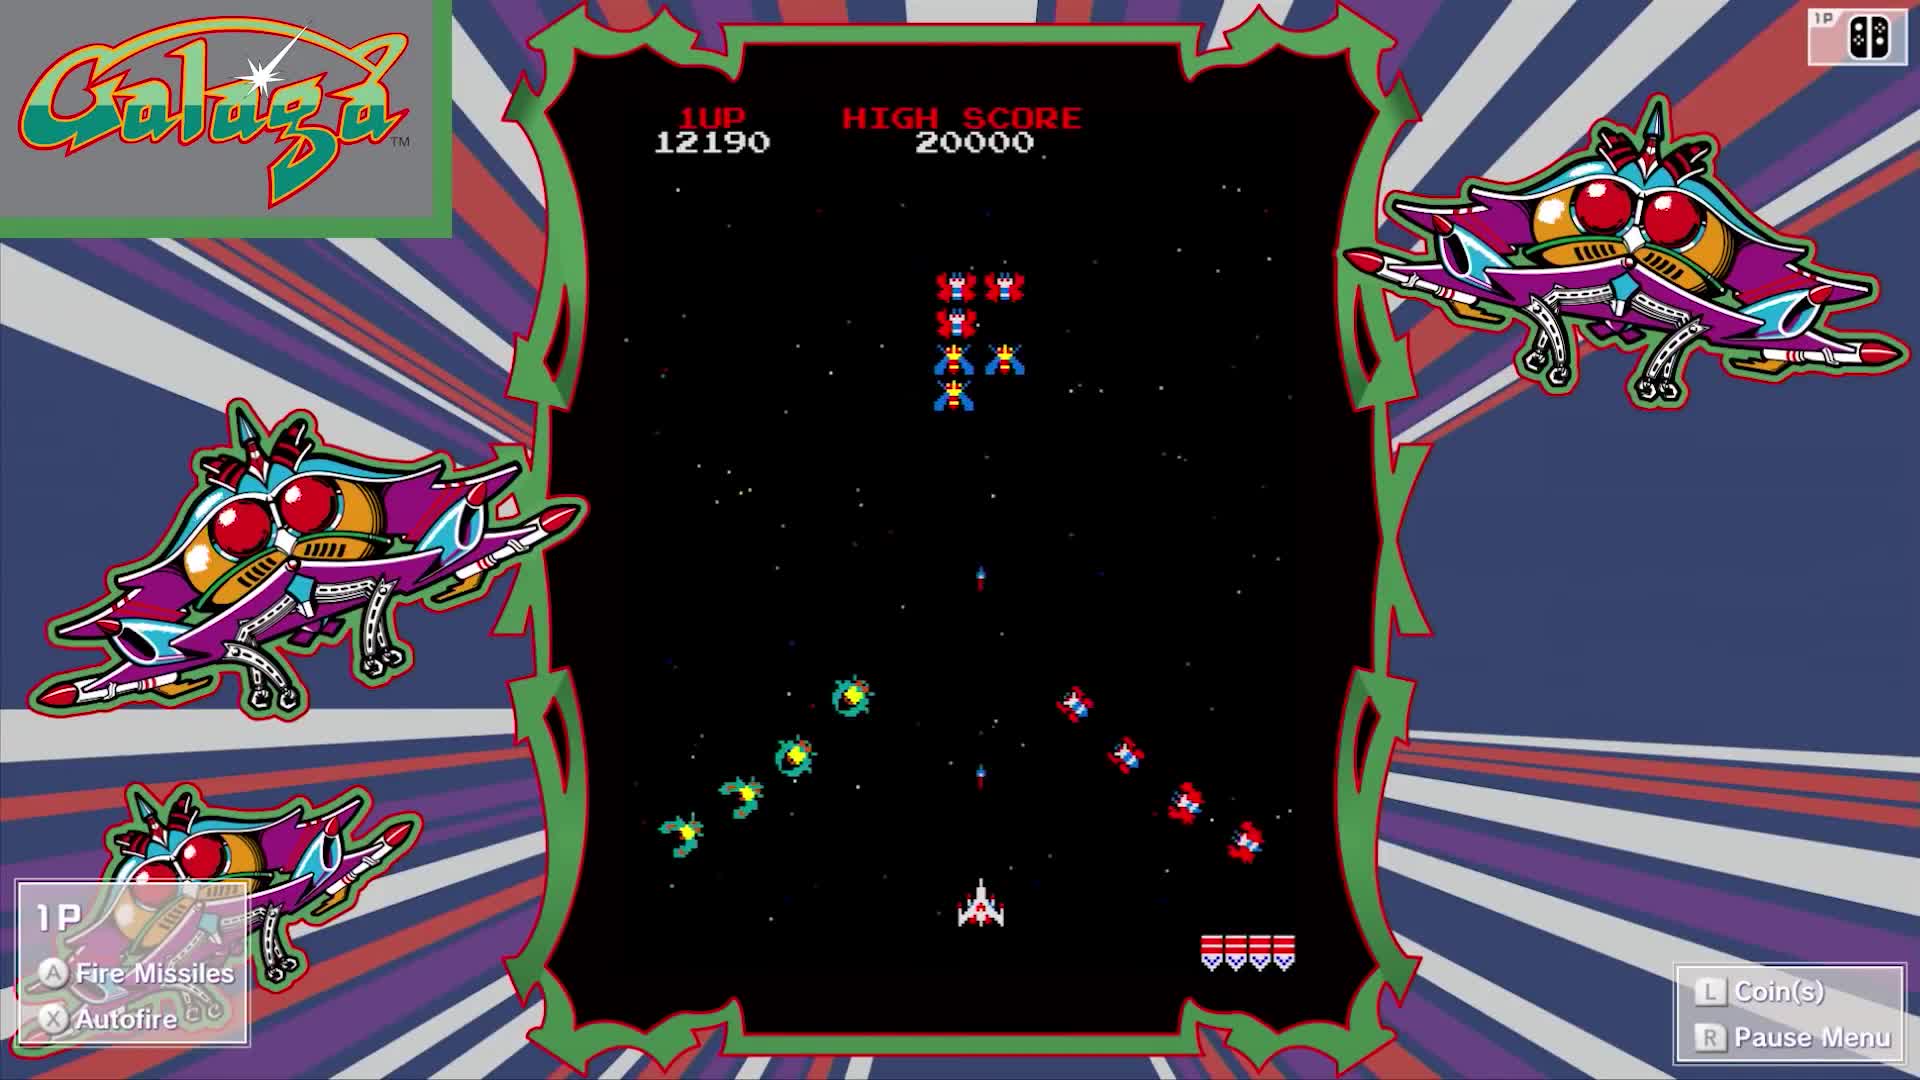 Namco Museum Arcade PAC - Switch - Announcement trailer